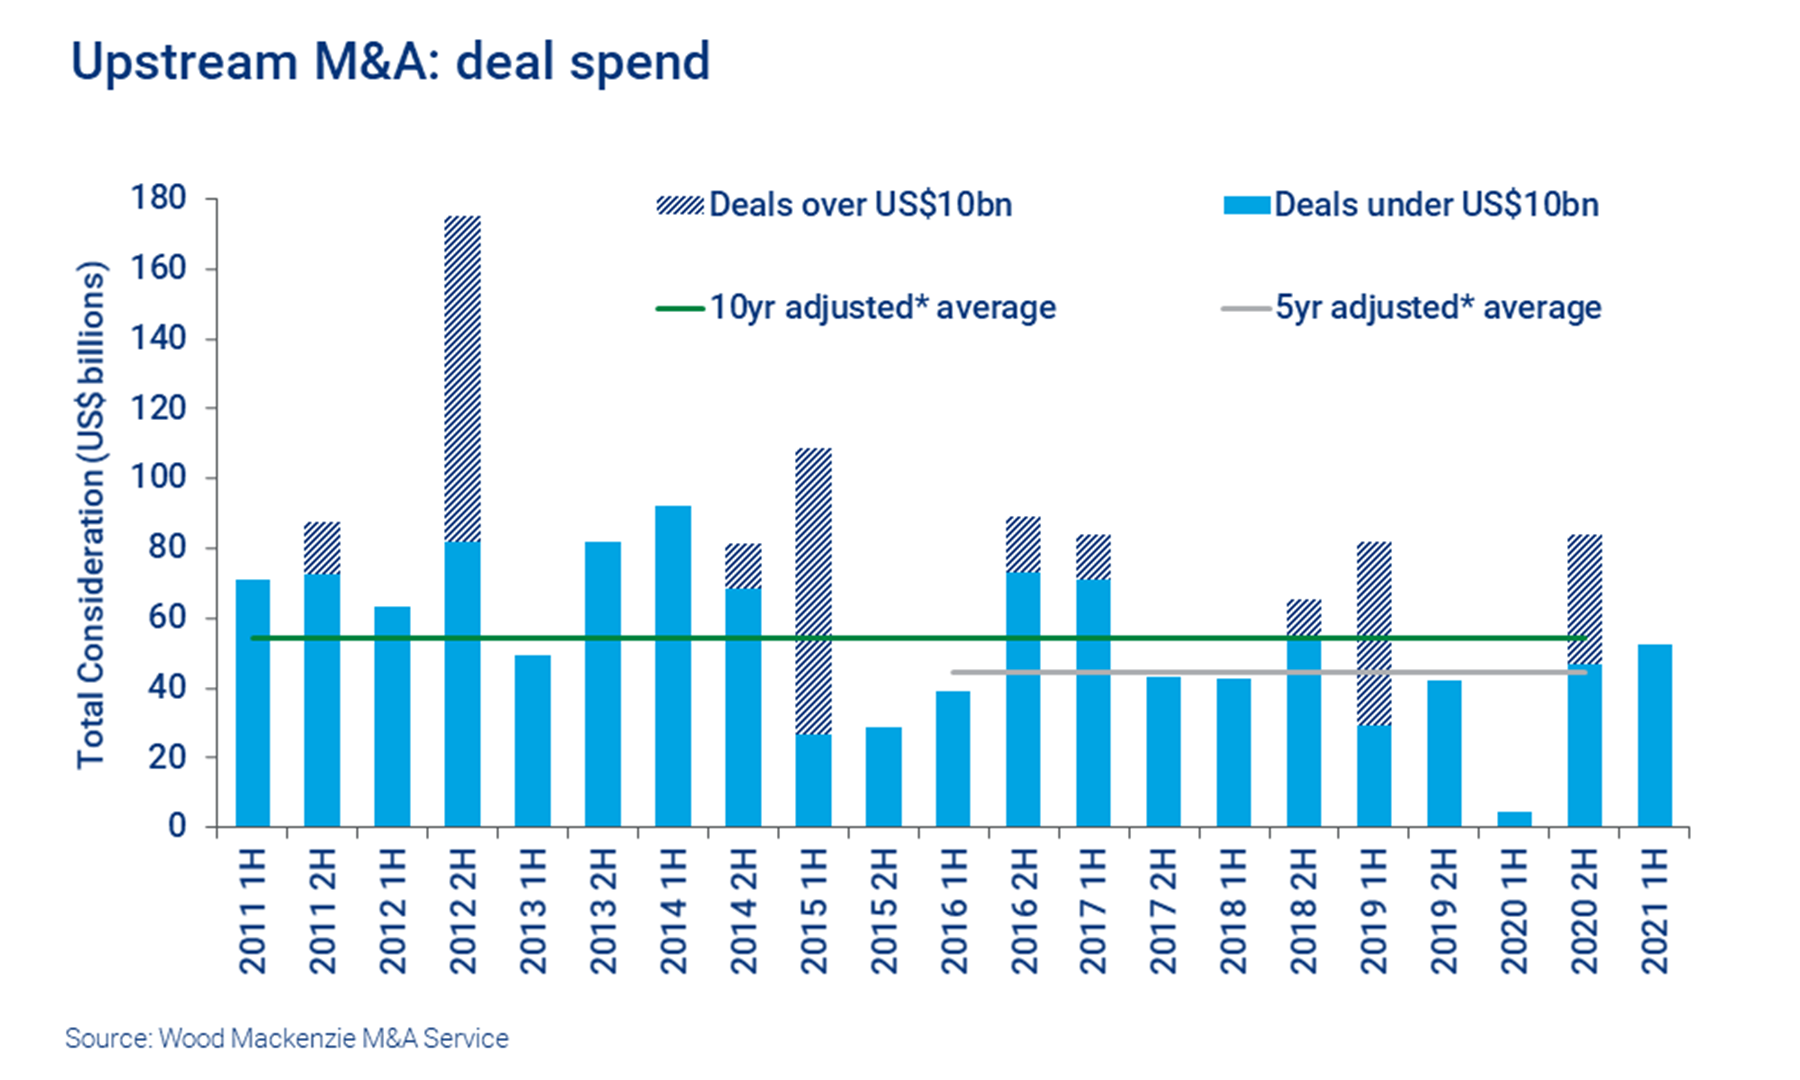 Chart shows upstream M&A activity pick up pace in the first half of 2021